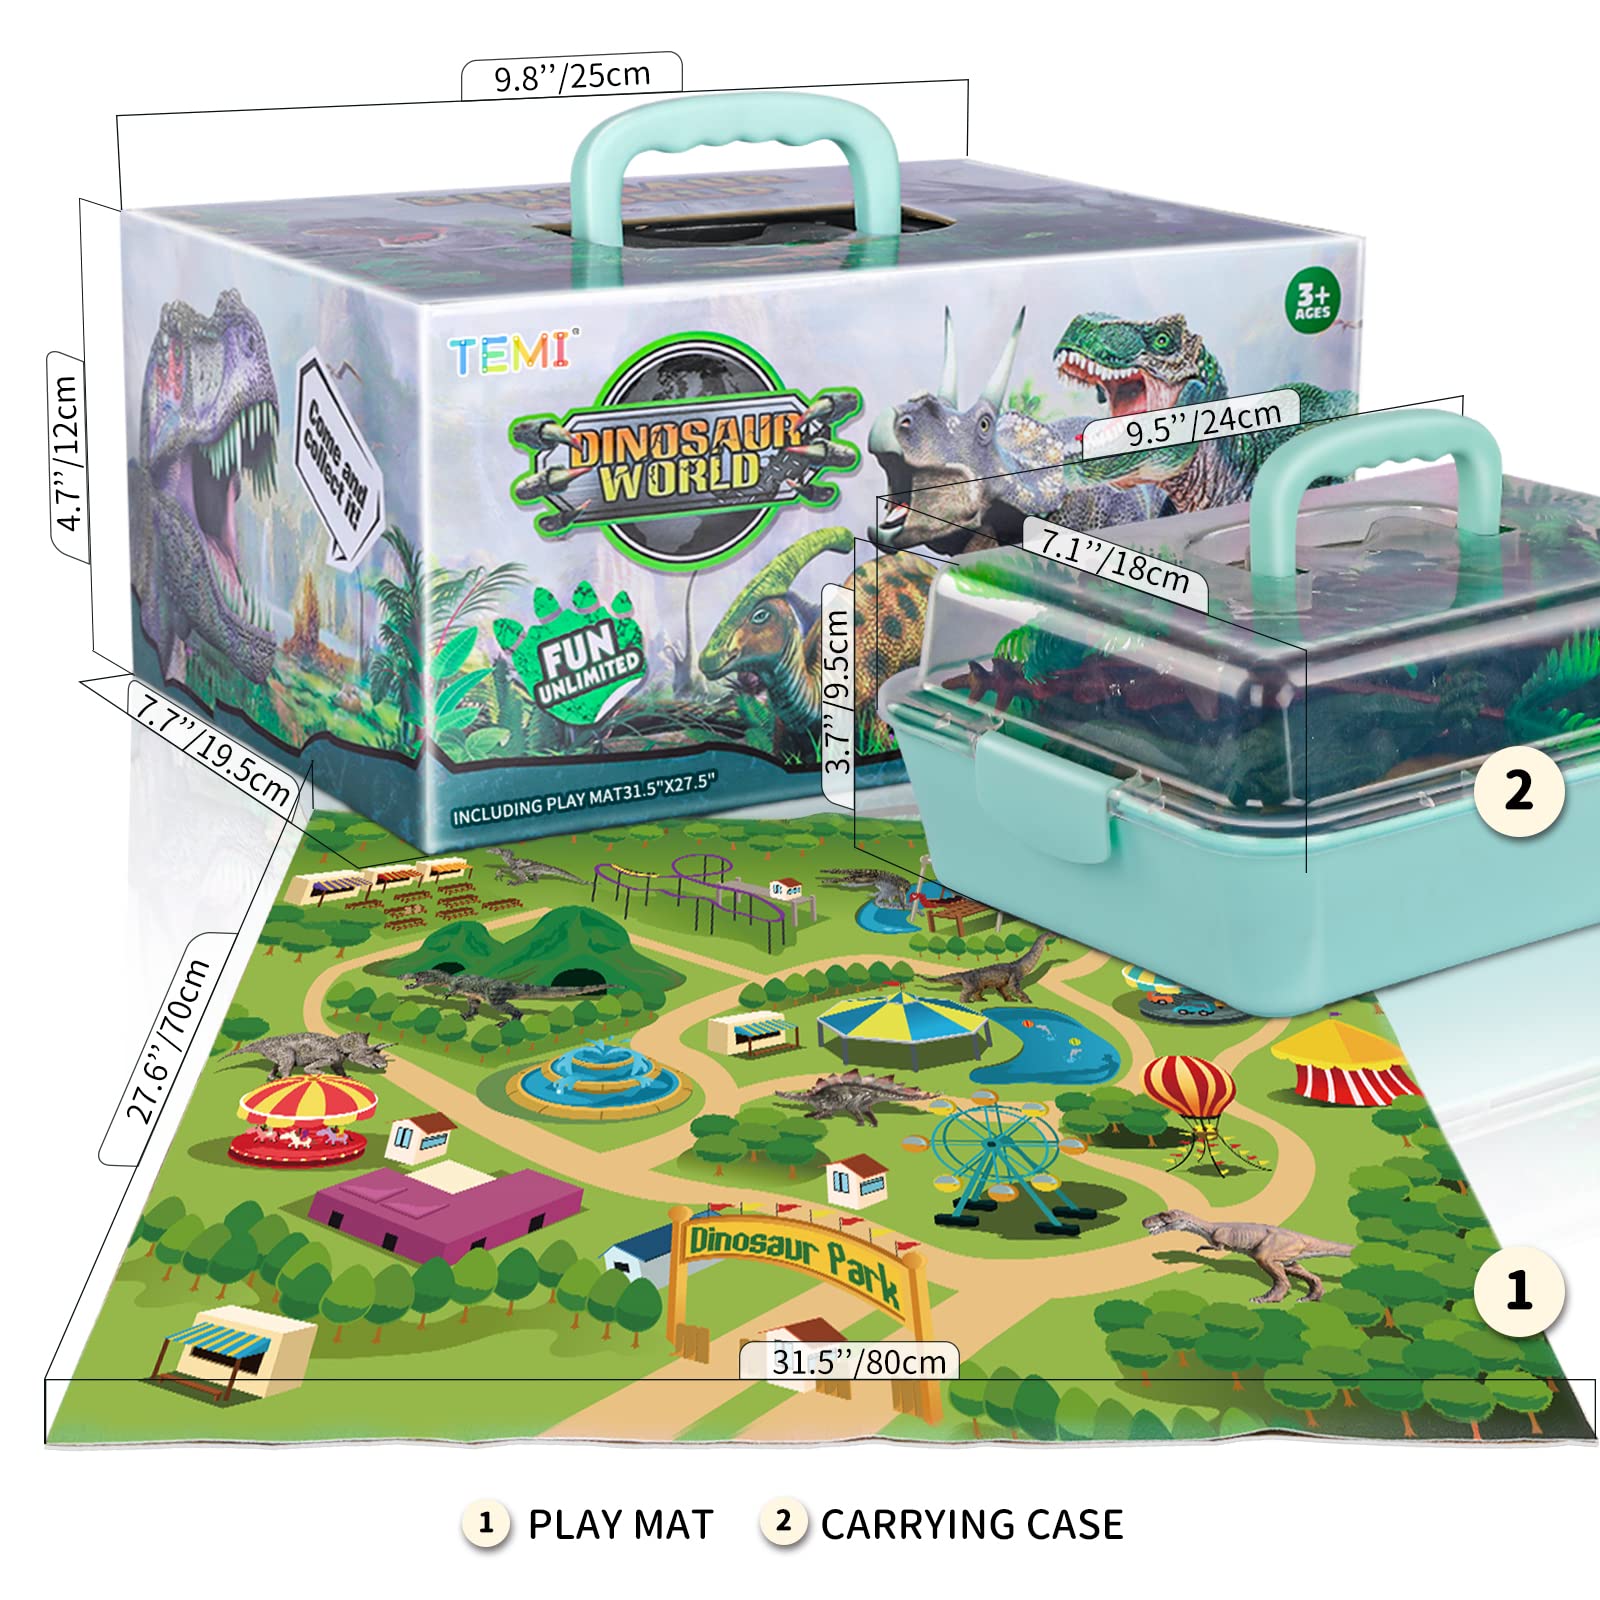 TEMI Dinosaur Toys for Kids 3-5 with Play Mat & Trees, Realistic Jurassic Dinosaur Figures to Create a Dino World Includes T-rex, Triceratops, Velociraptor, Gift for Toddlers Boys & Girls 2 3 4 5 6 7